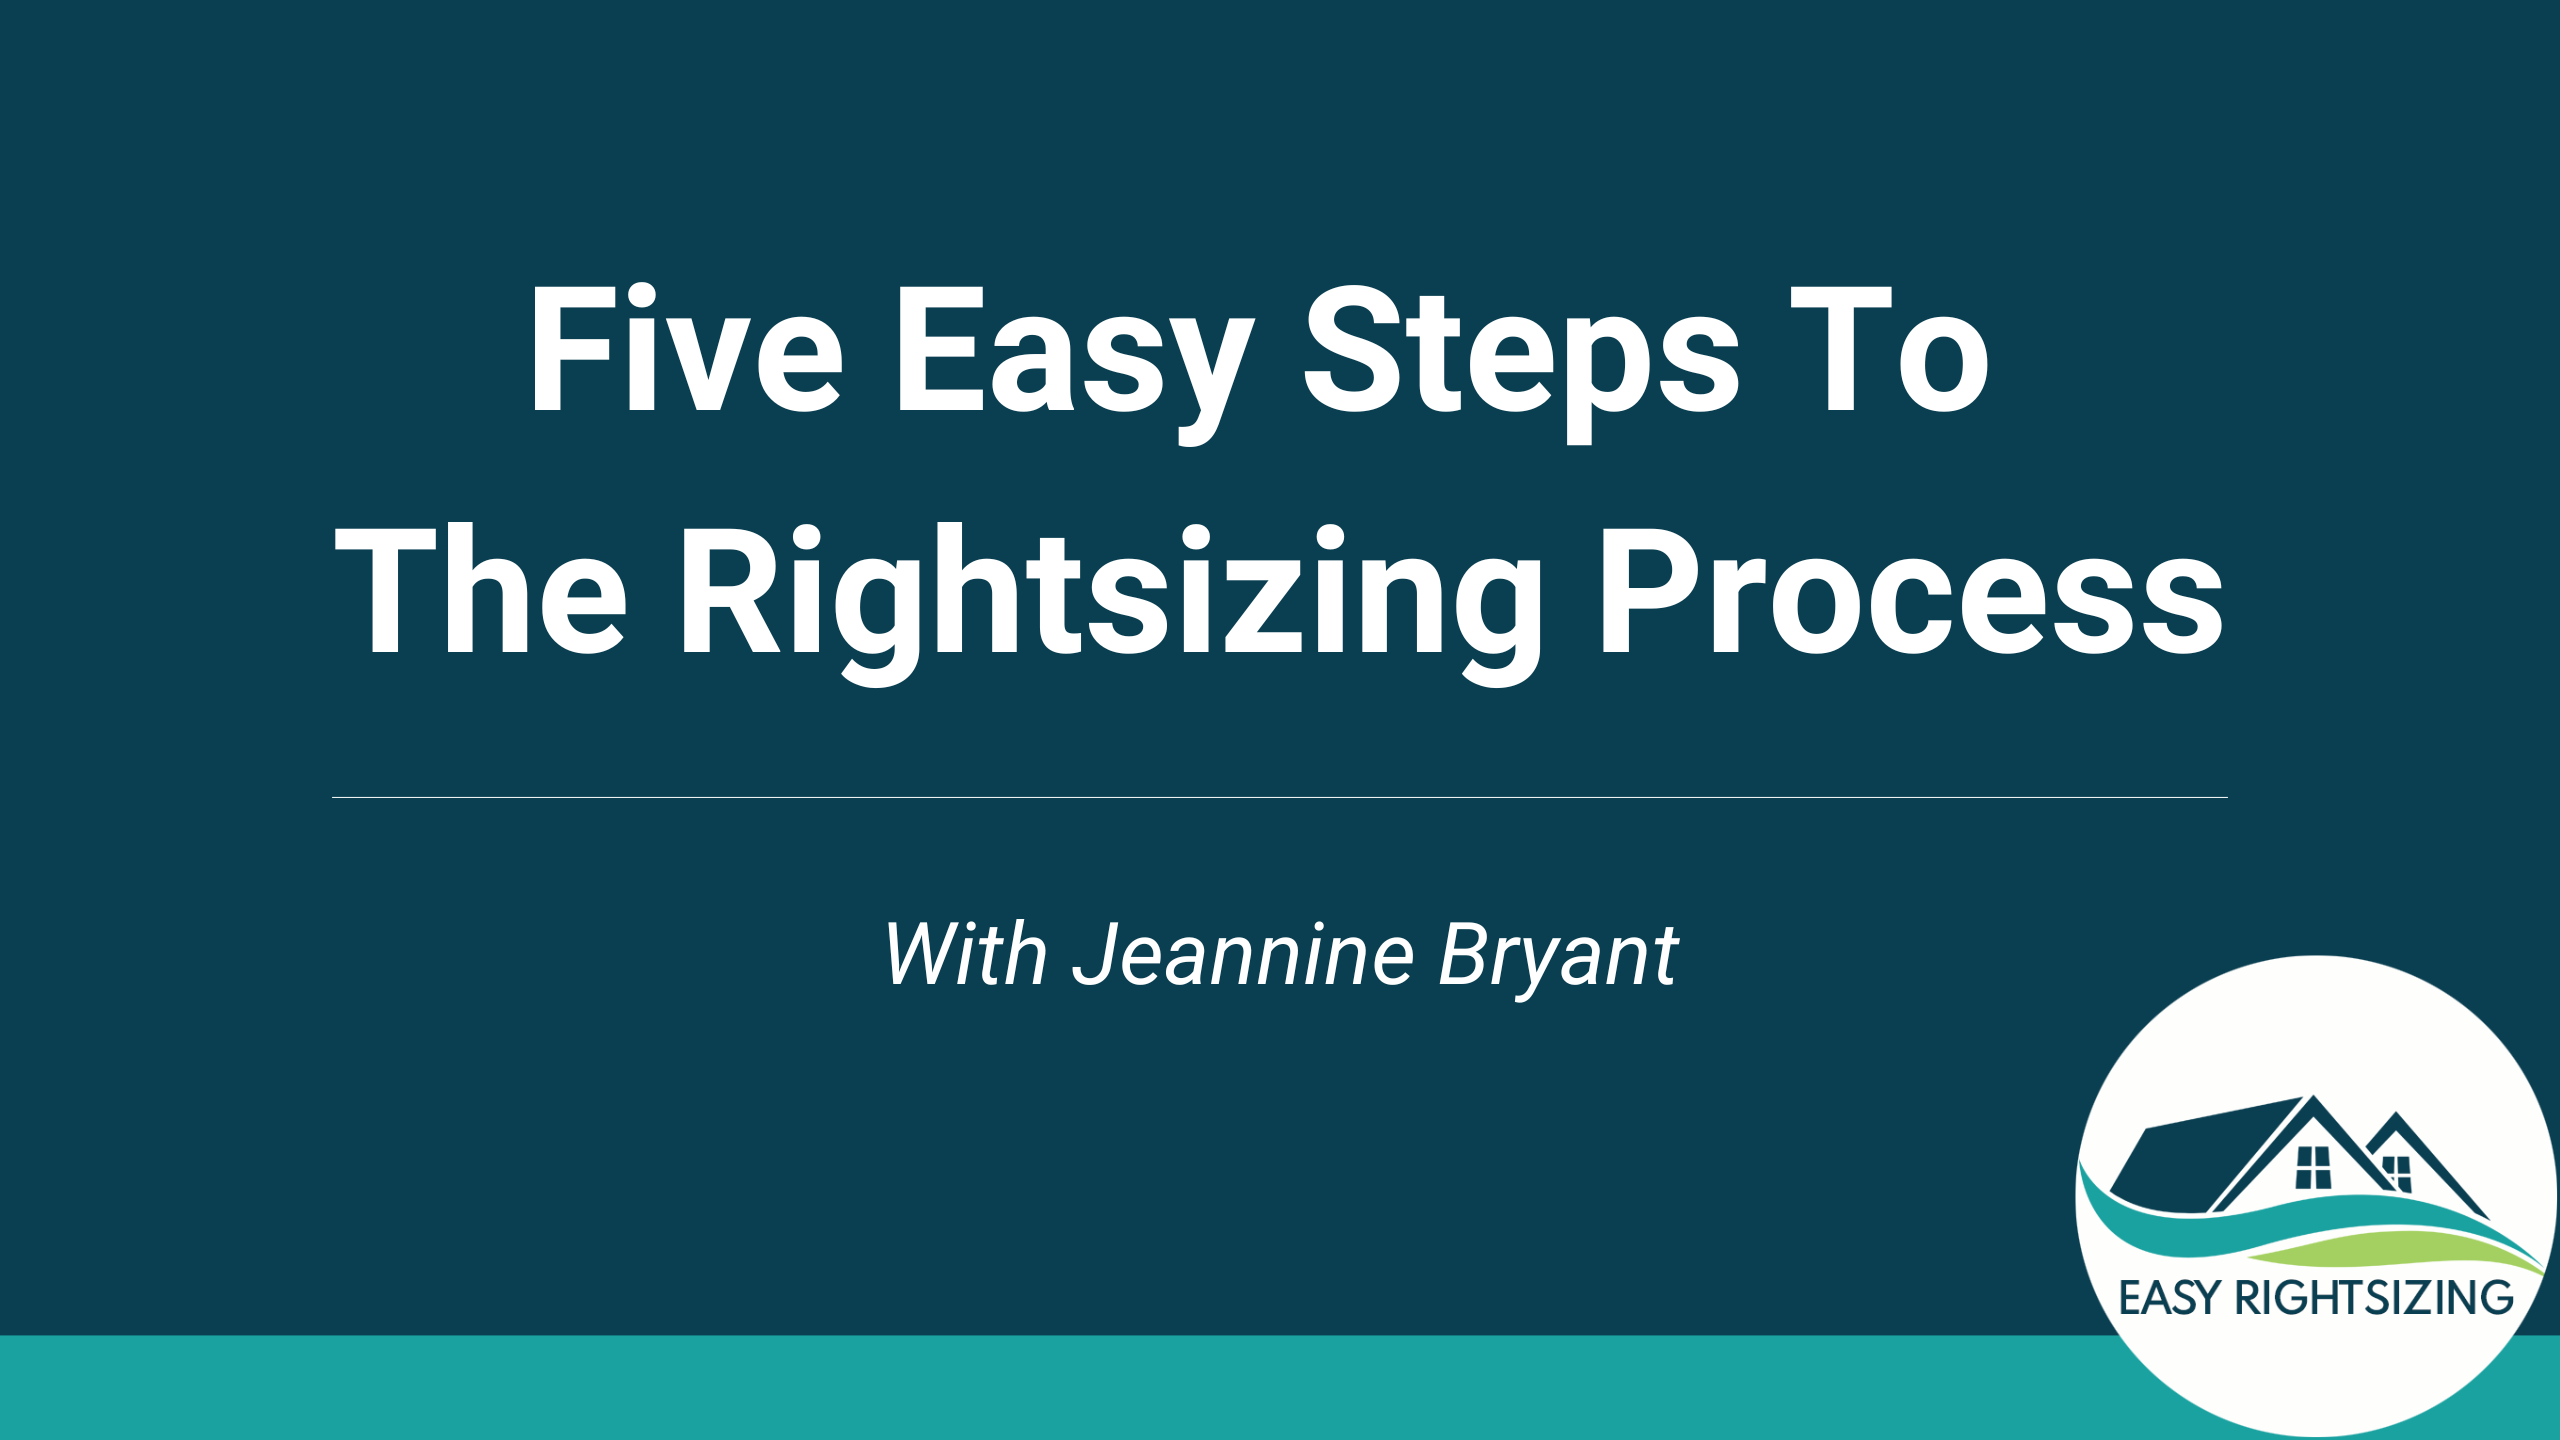 Five Easy Steps To The Rightsizing Process